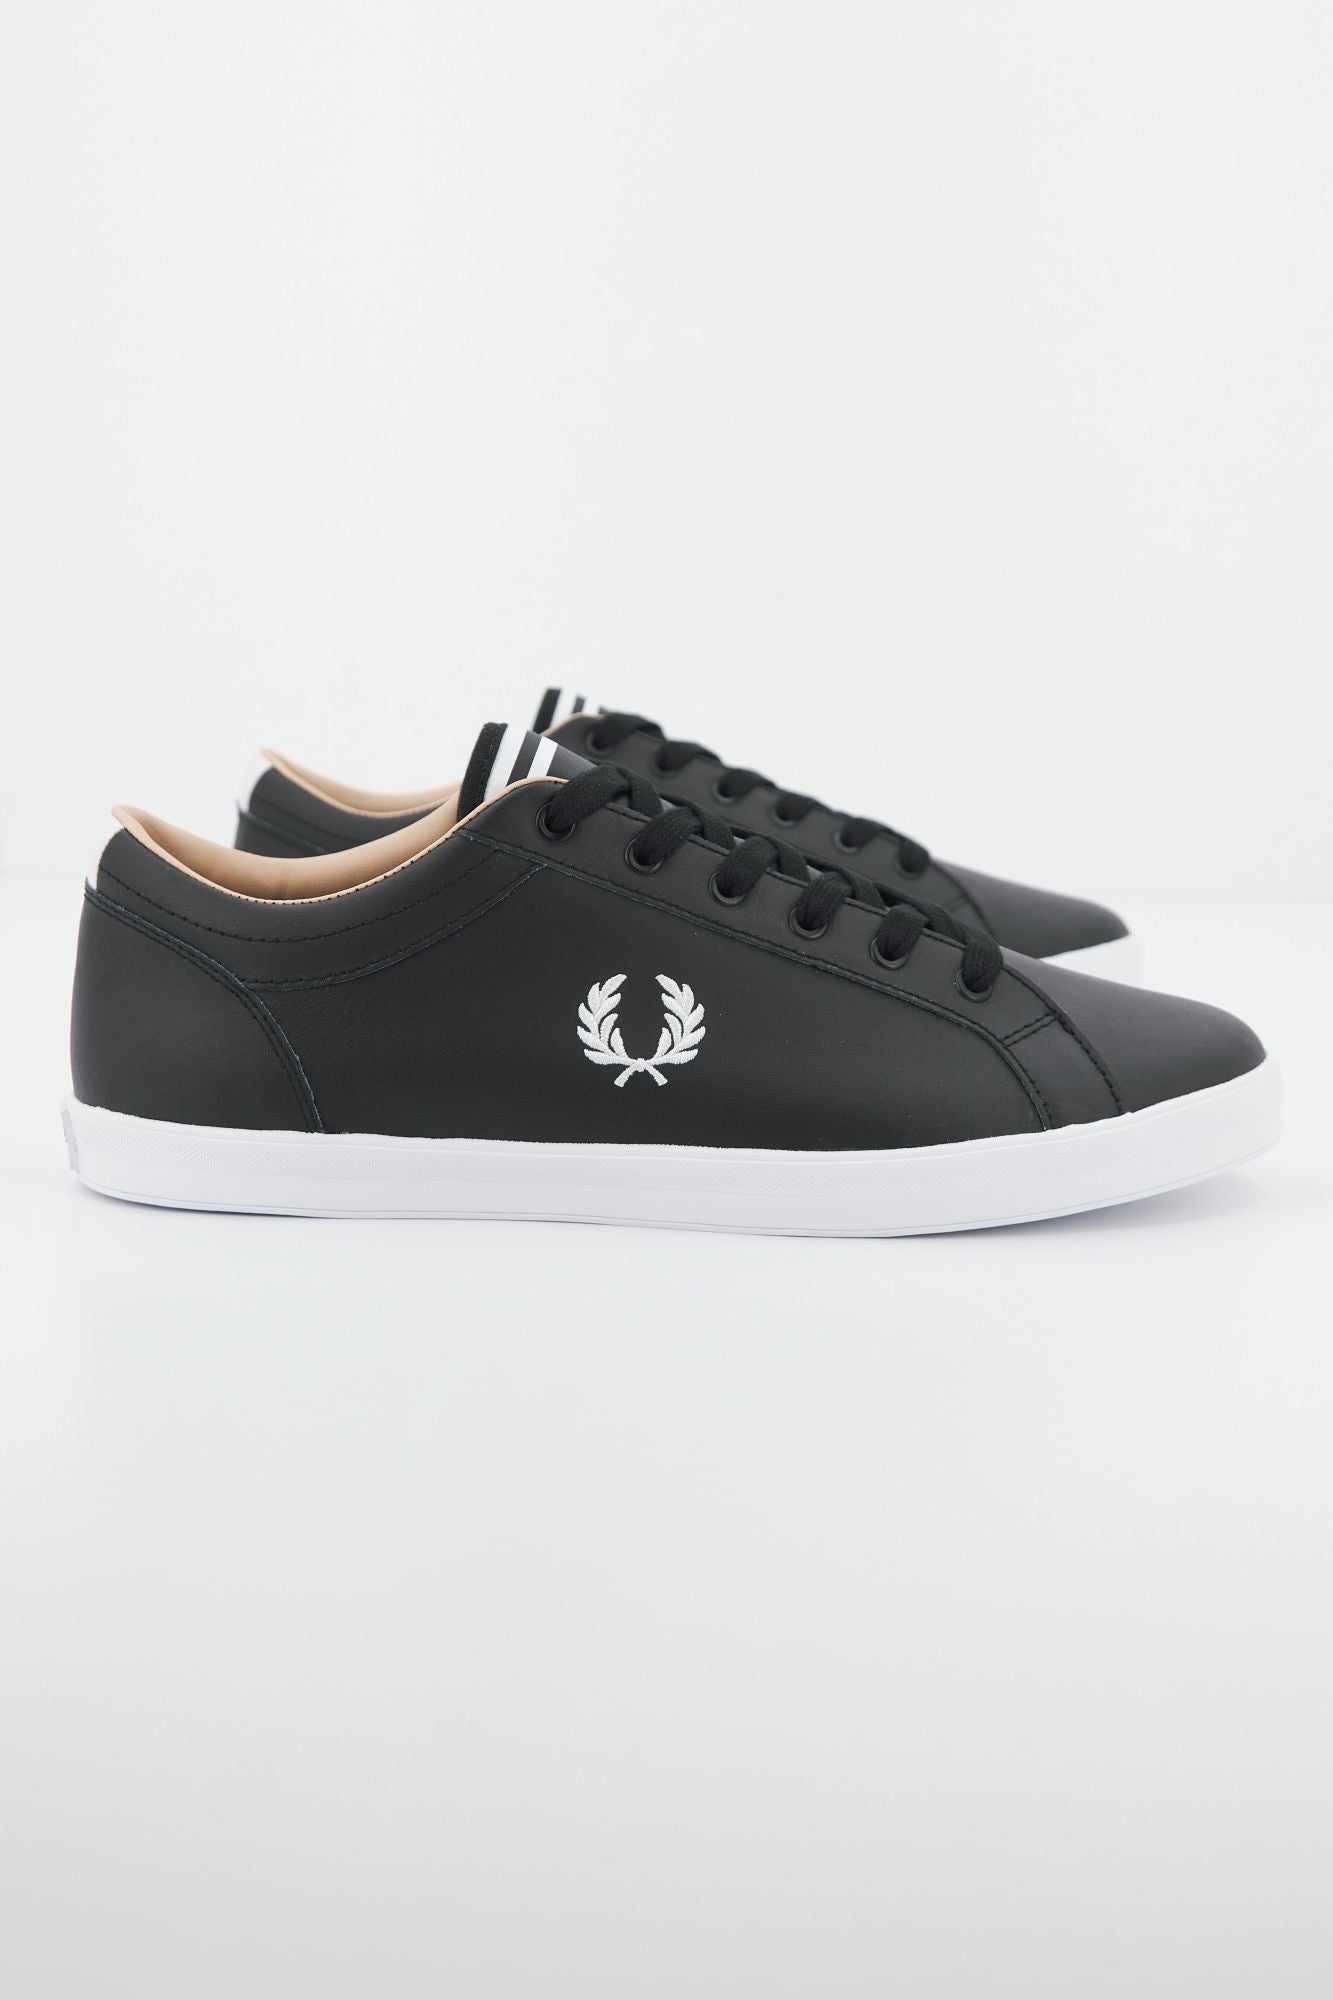 FRED PERRY B1228  en color NEGRO (2)